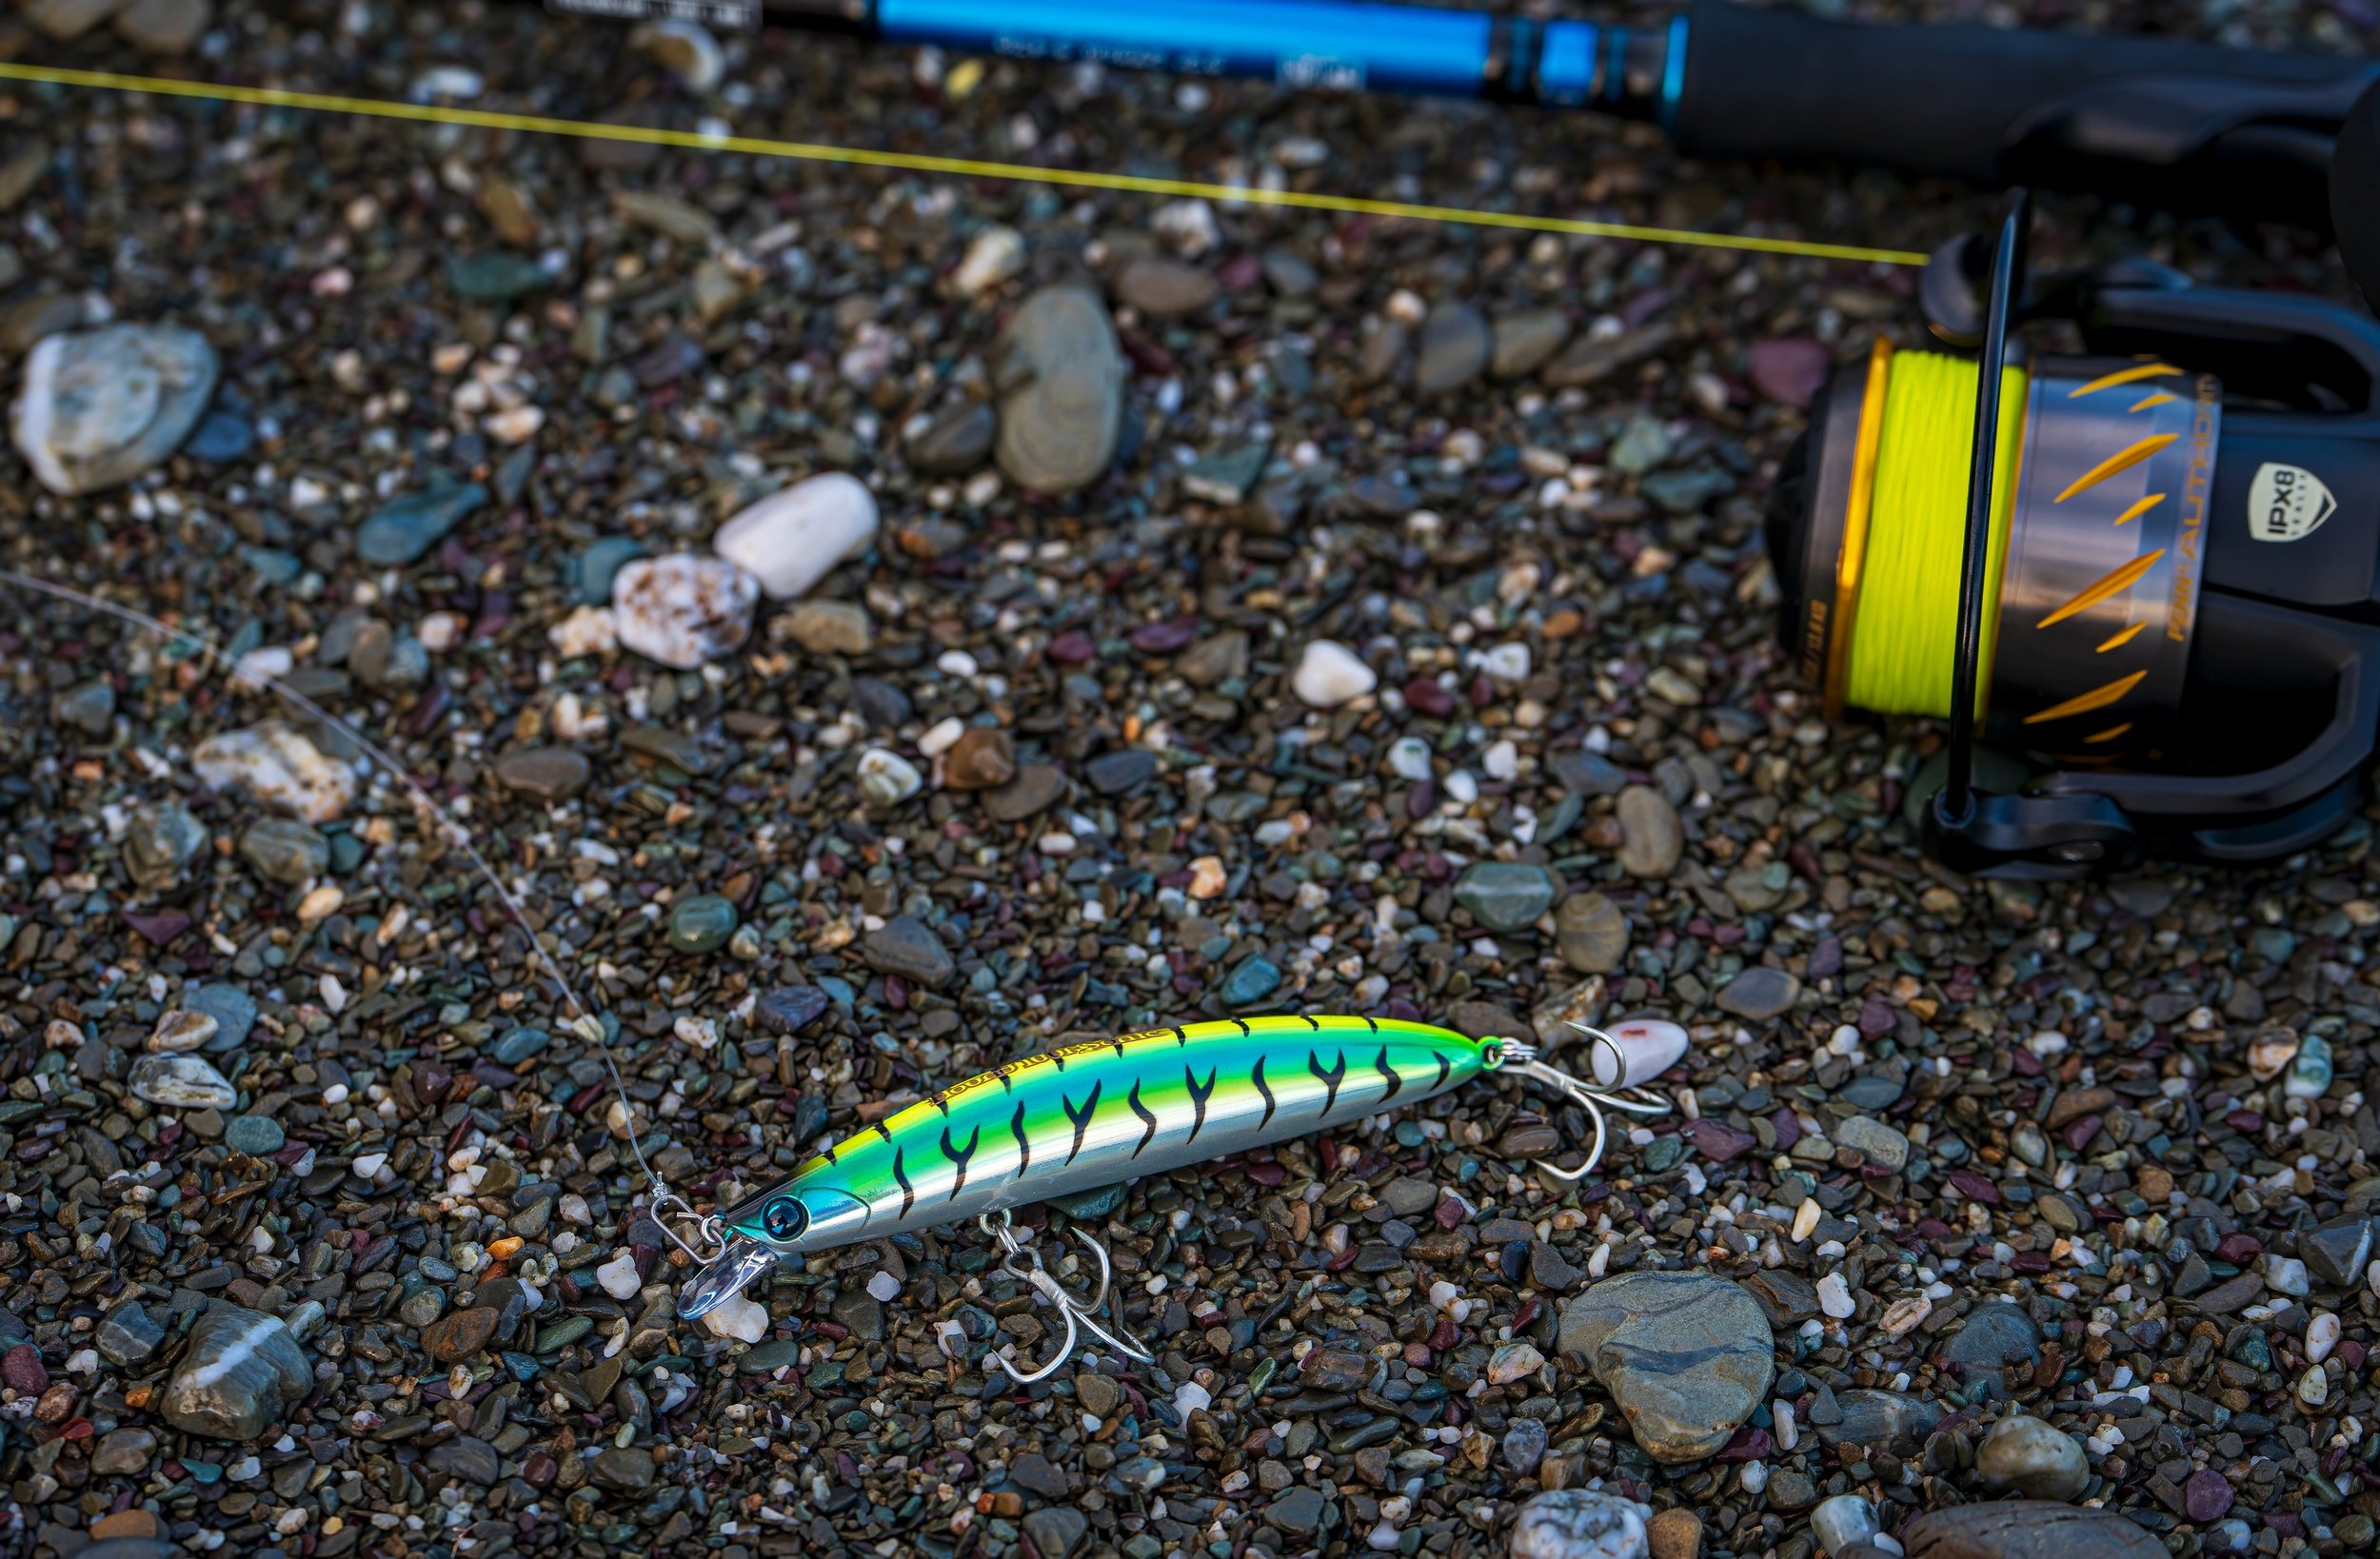 Sub-surface hard lures - whack and crank or do a bit of twitchy